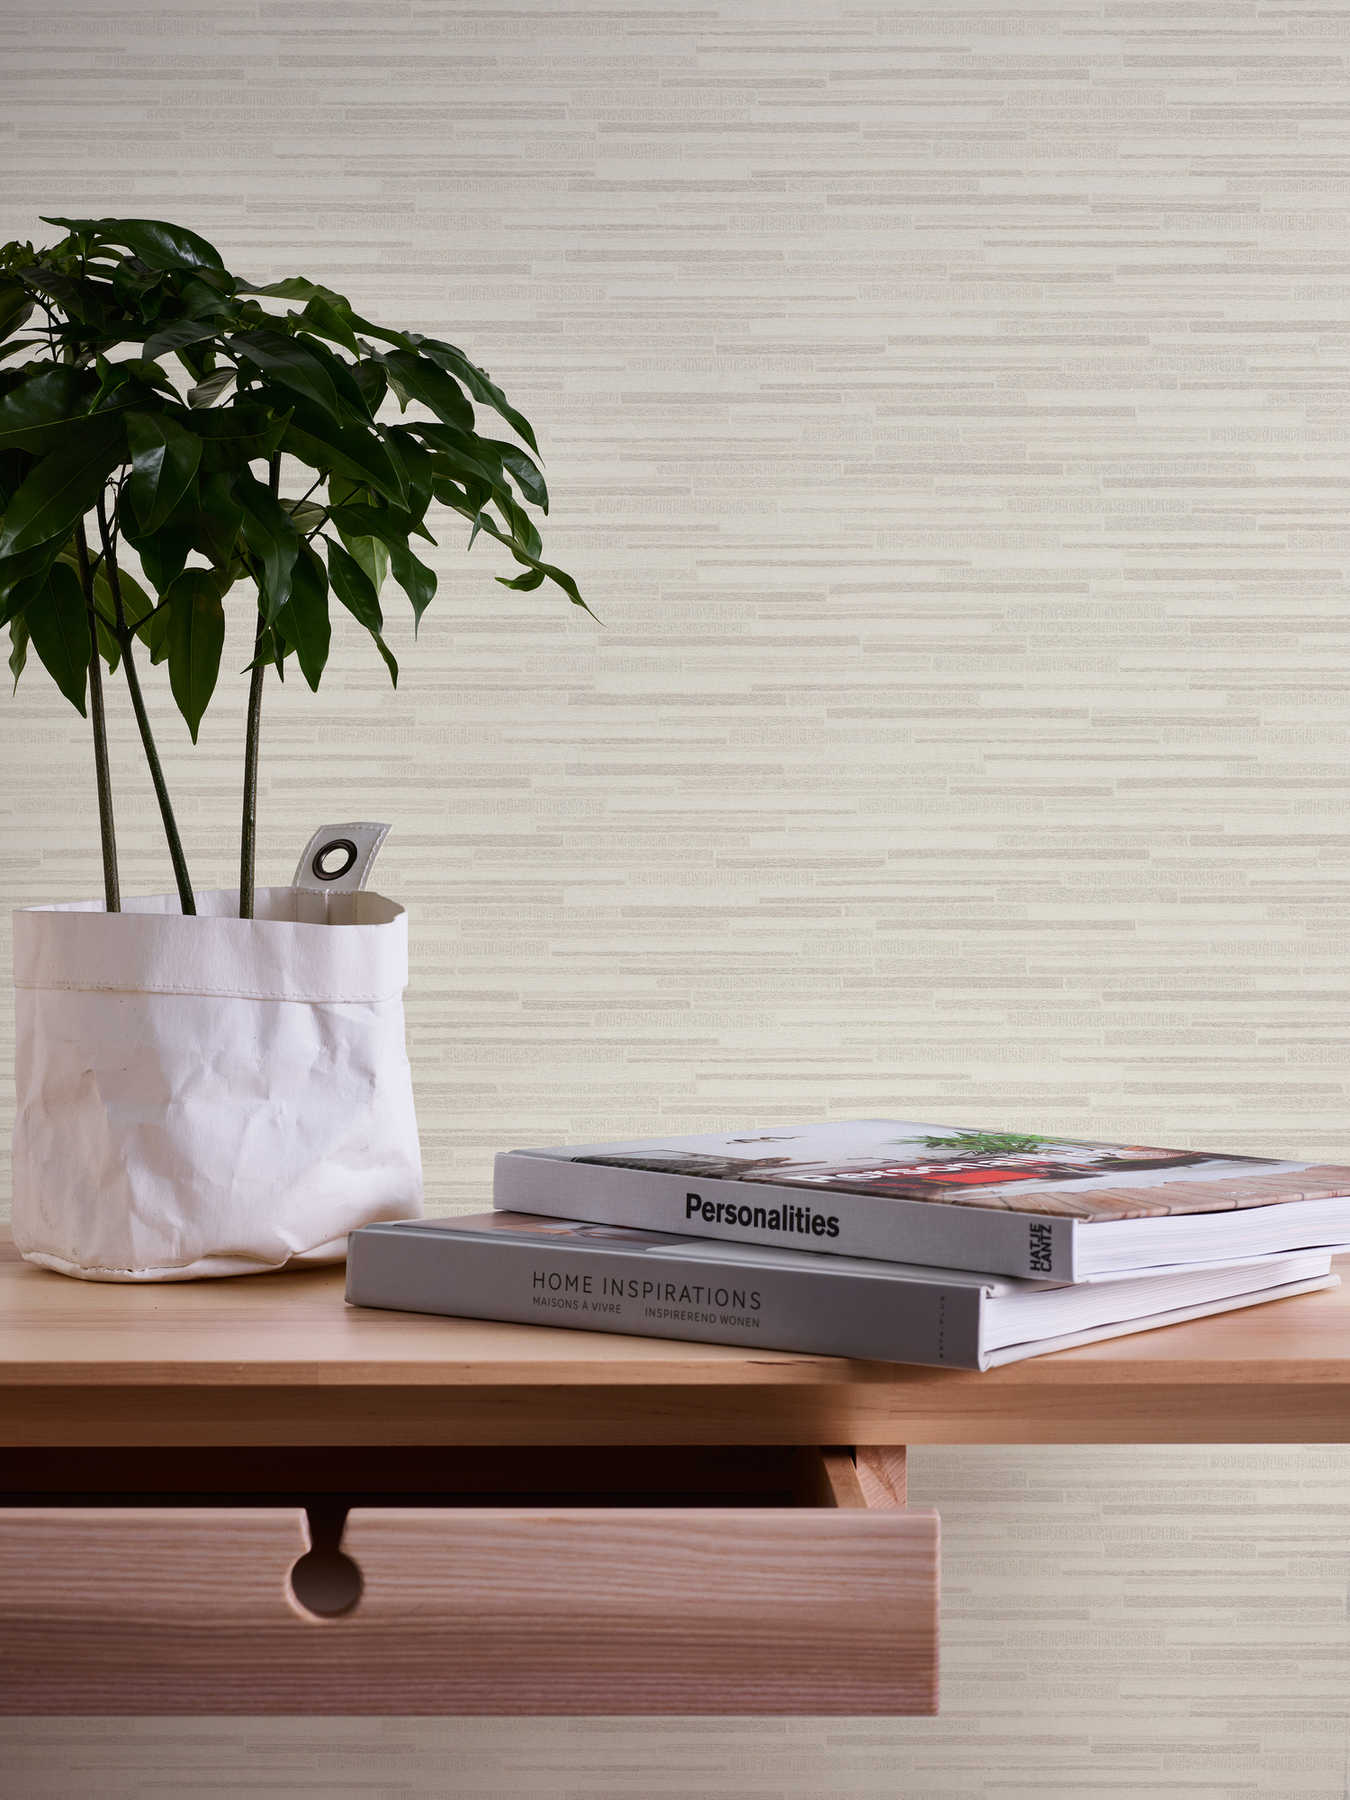             Wallpaper with line design & stone look - white, grey
        